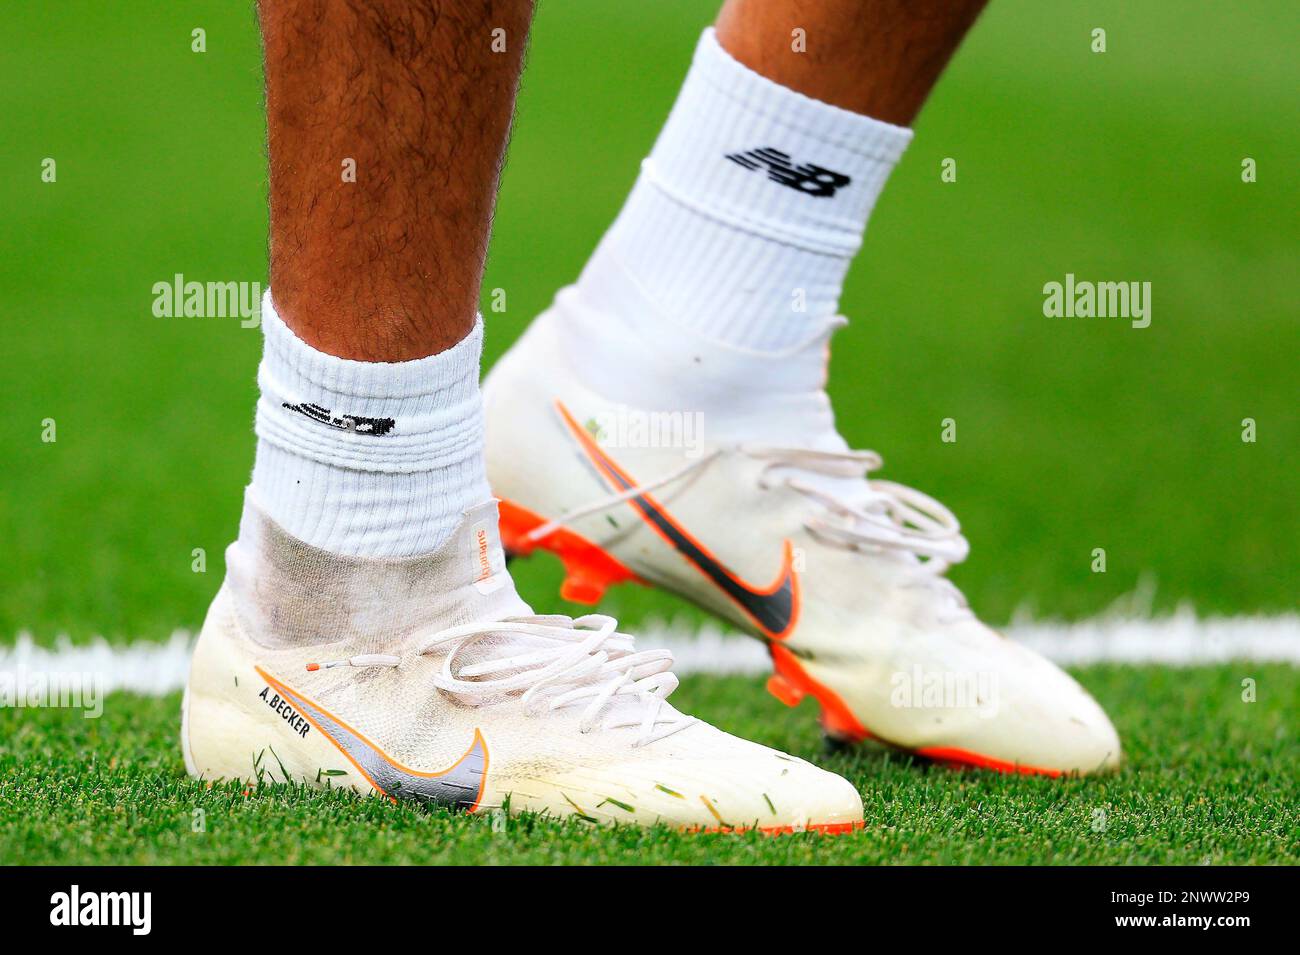 August 7, 2018 - Liverpool, United Kingdom - The personalised Nike  Supervenom football boots worn by Liverpool''s Alisson Becker during the  pre-season friendly match at Anfield Stadium, Liverpool. Picture date 7th  August